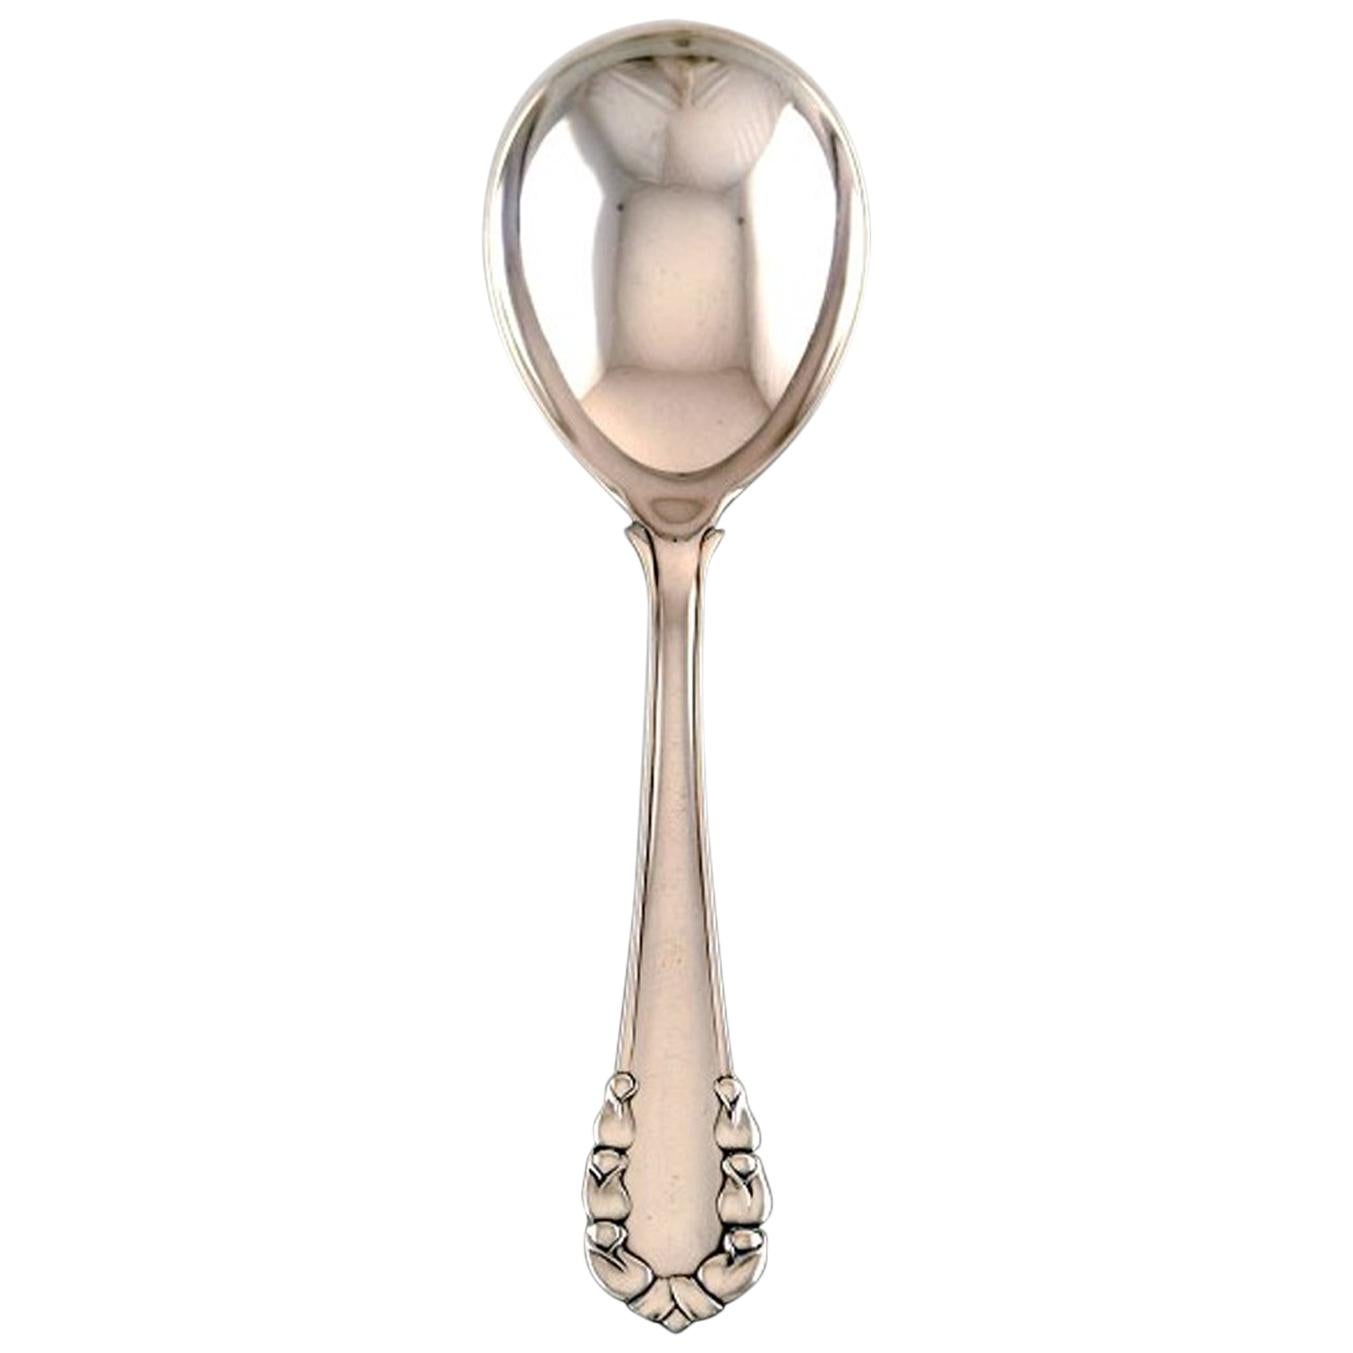 Georg Jensen 'Lily of the Valley' Serving Spoon in Sterling Silver